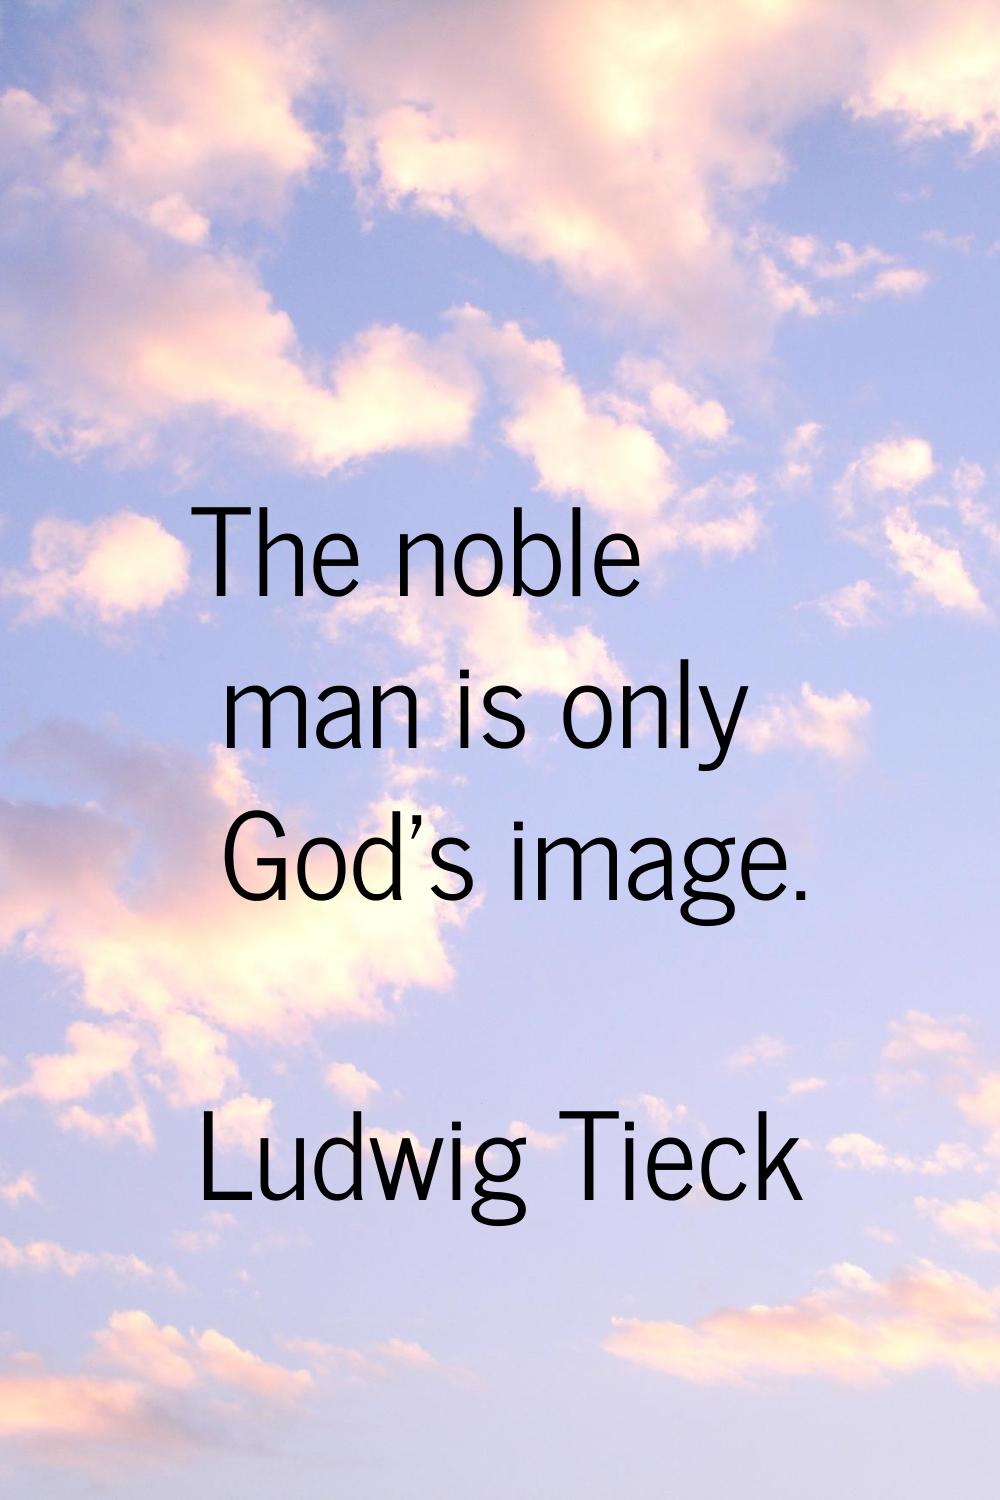 The noble man is only God's image.